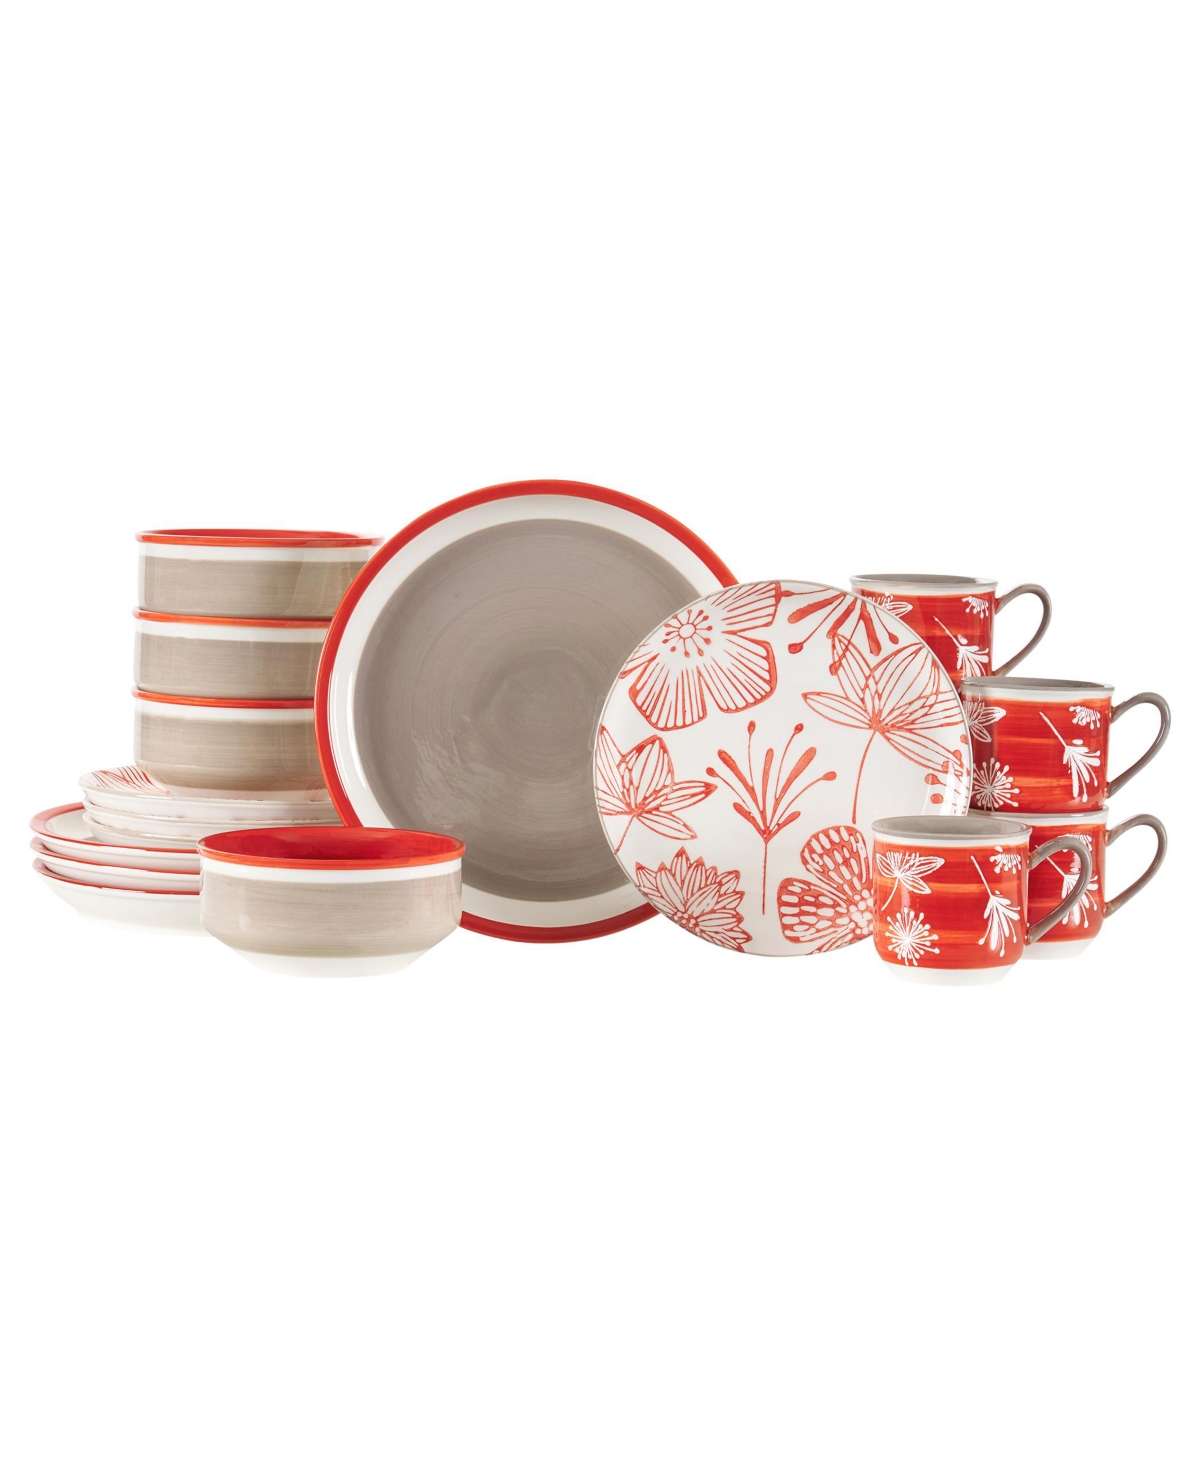 Couleur Dinnerware 16 Piece Set, Service for 4 - Red